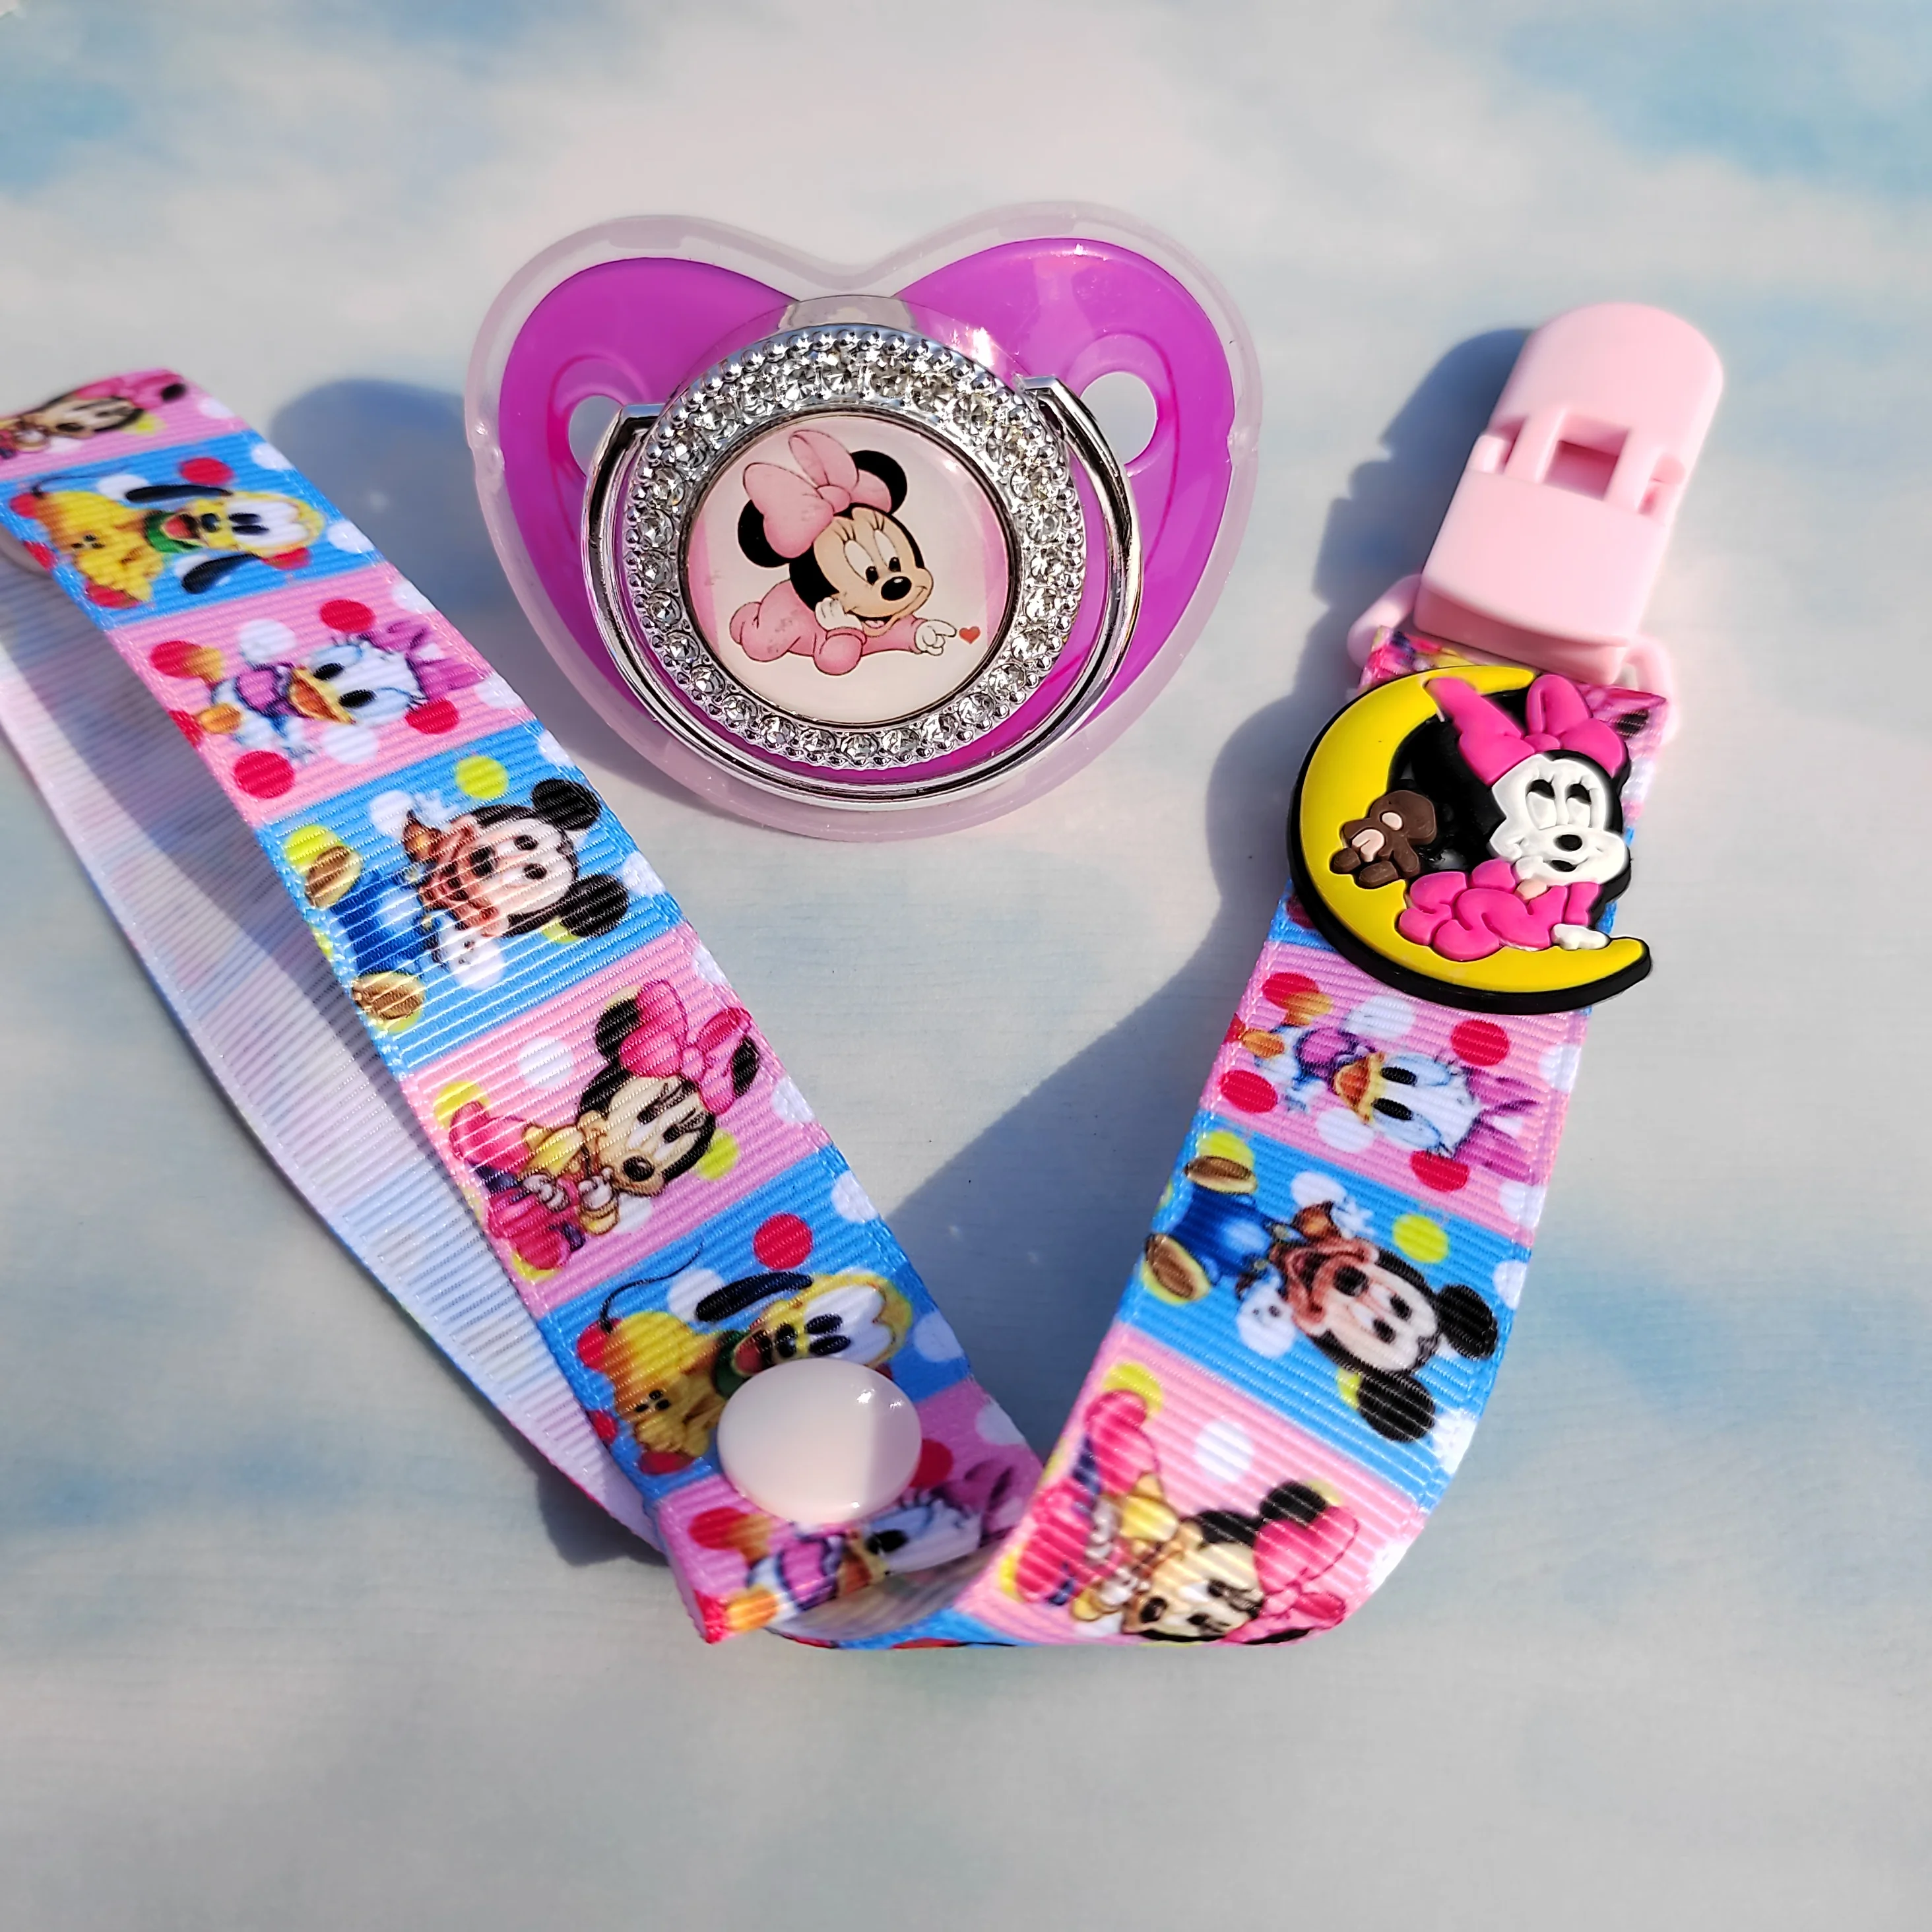 

Disney Minnie Mouse Cartoon Image Chupetes Para Bebes with Character Attache Tetine Clothes Clip Holder Baby Girls Birthday Gift